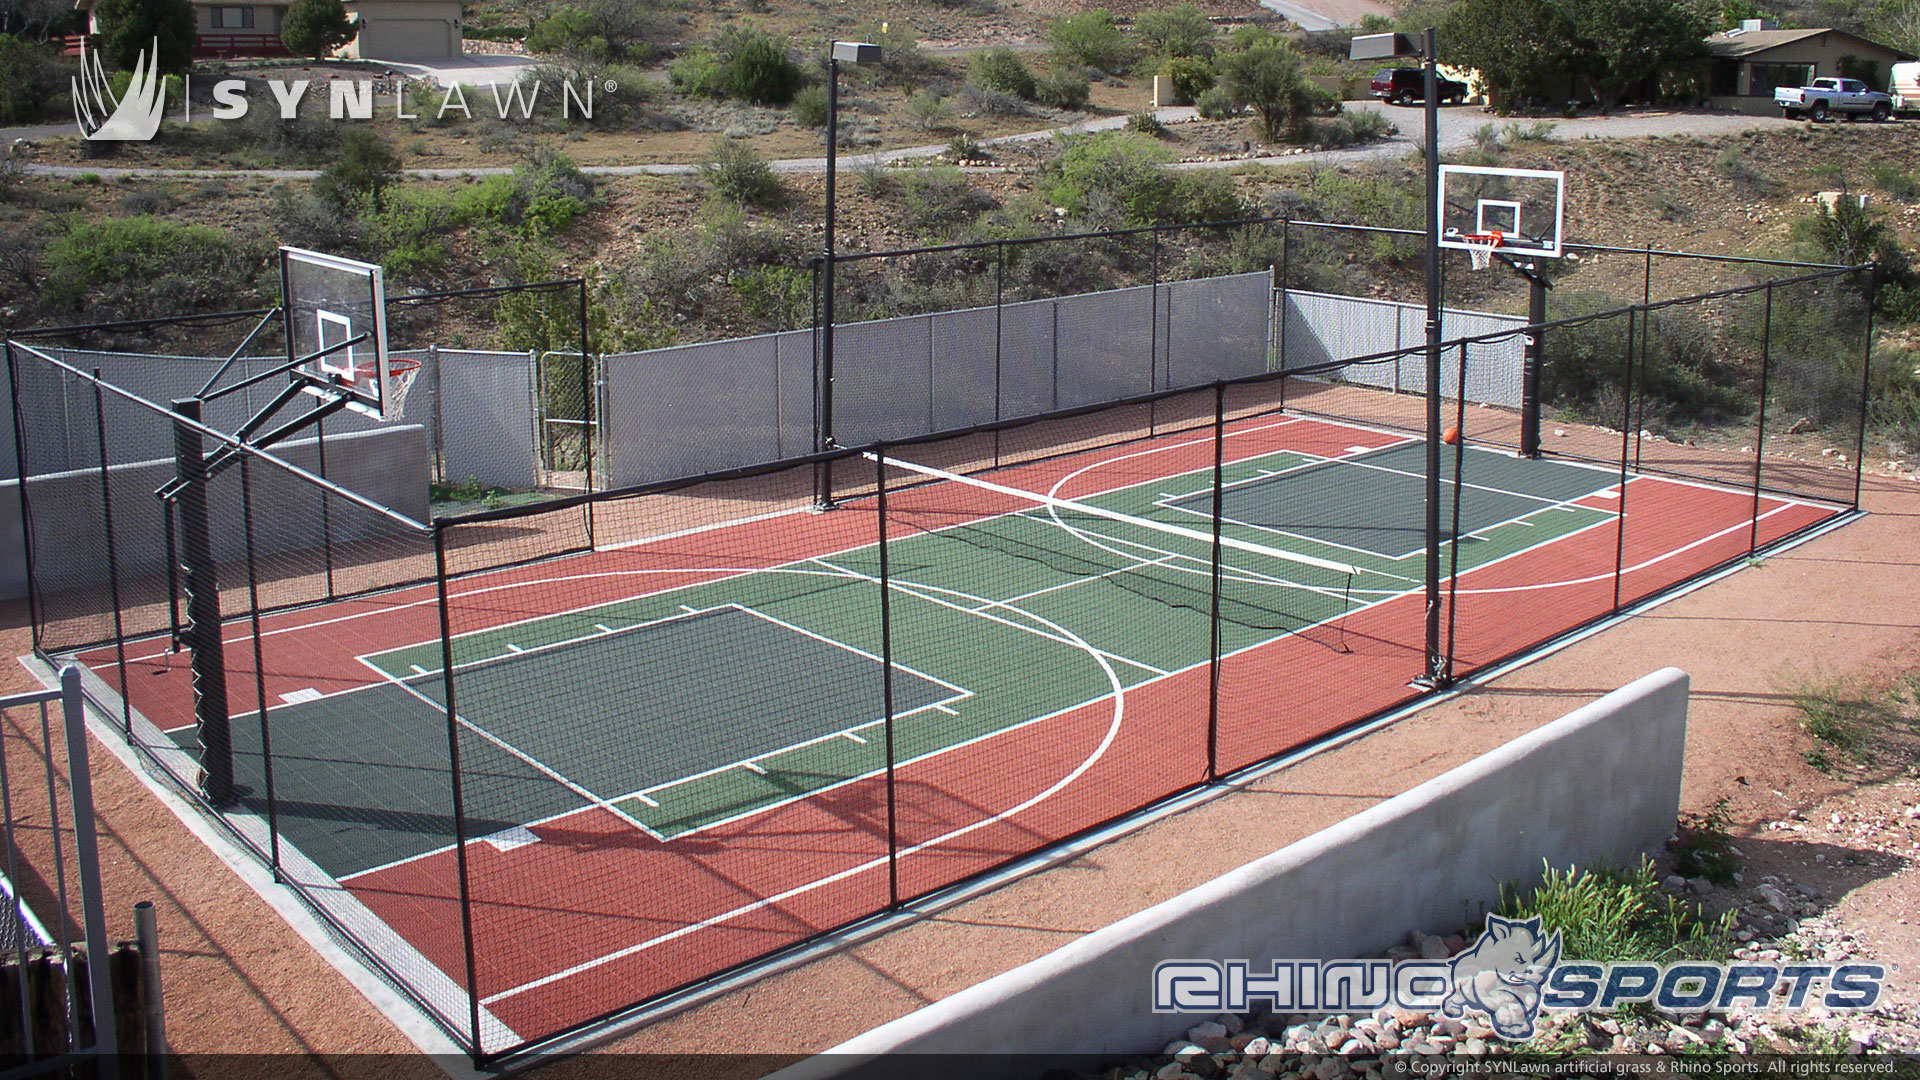 image of a multi-sport backyard court for basketball and tennis